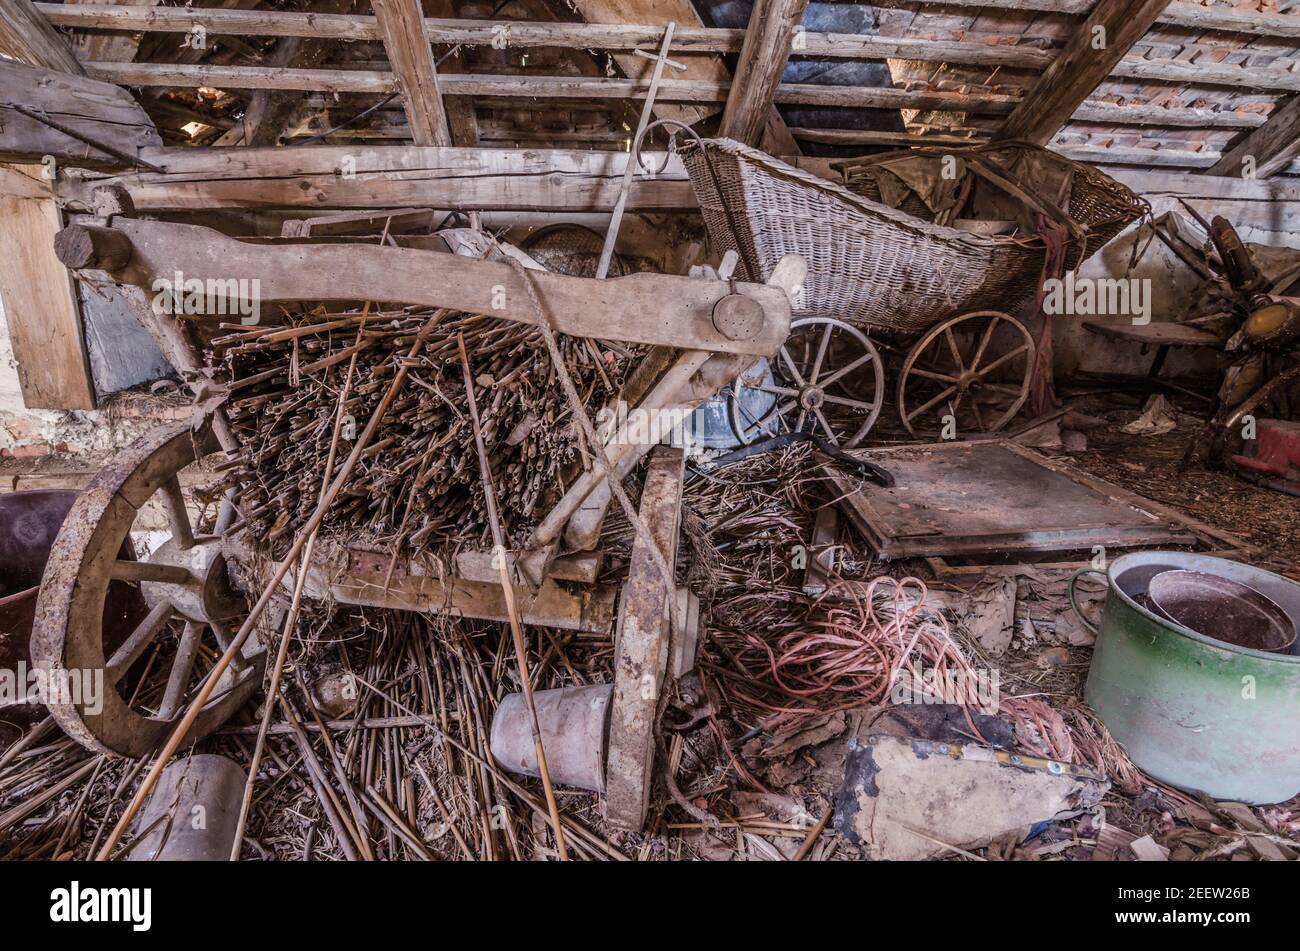 old carriages of wood and straw on a loft Stock Photo